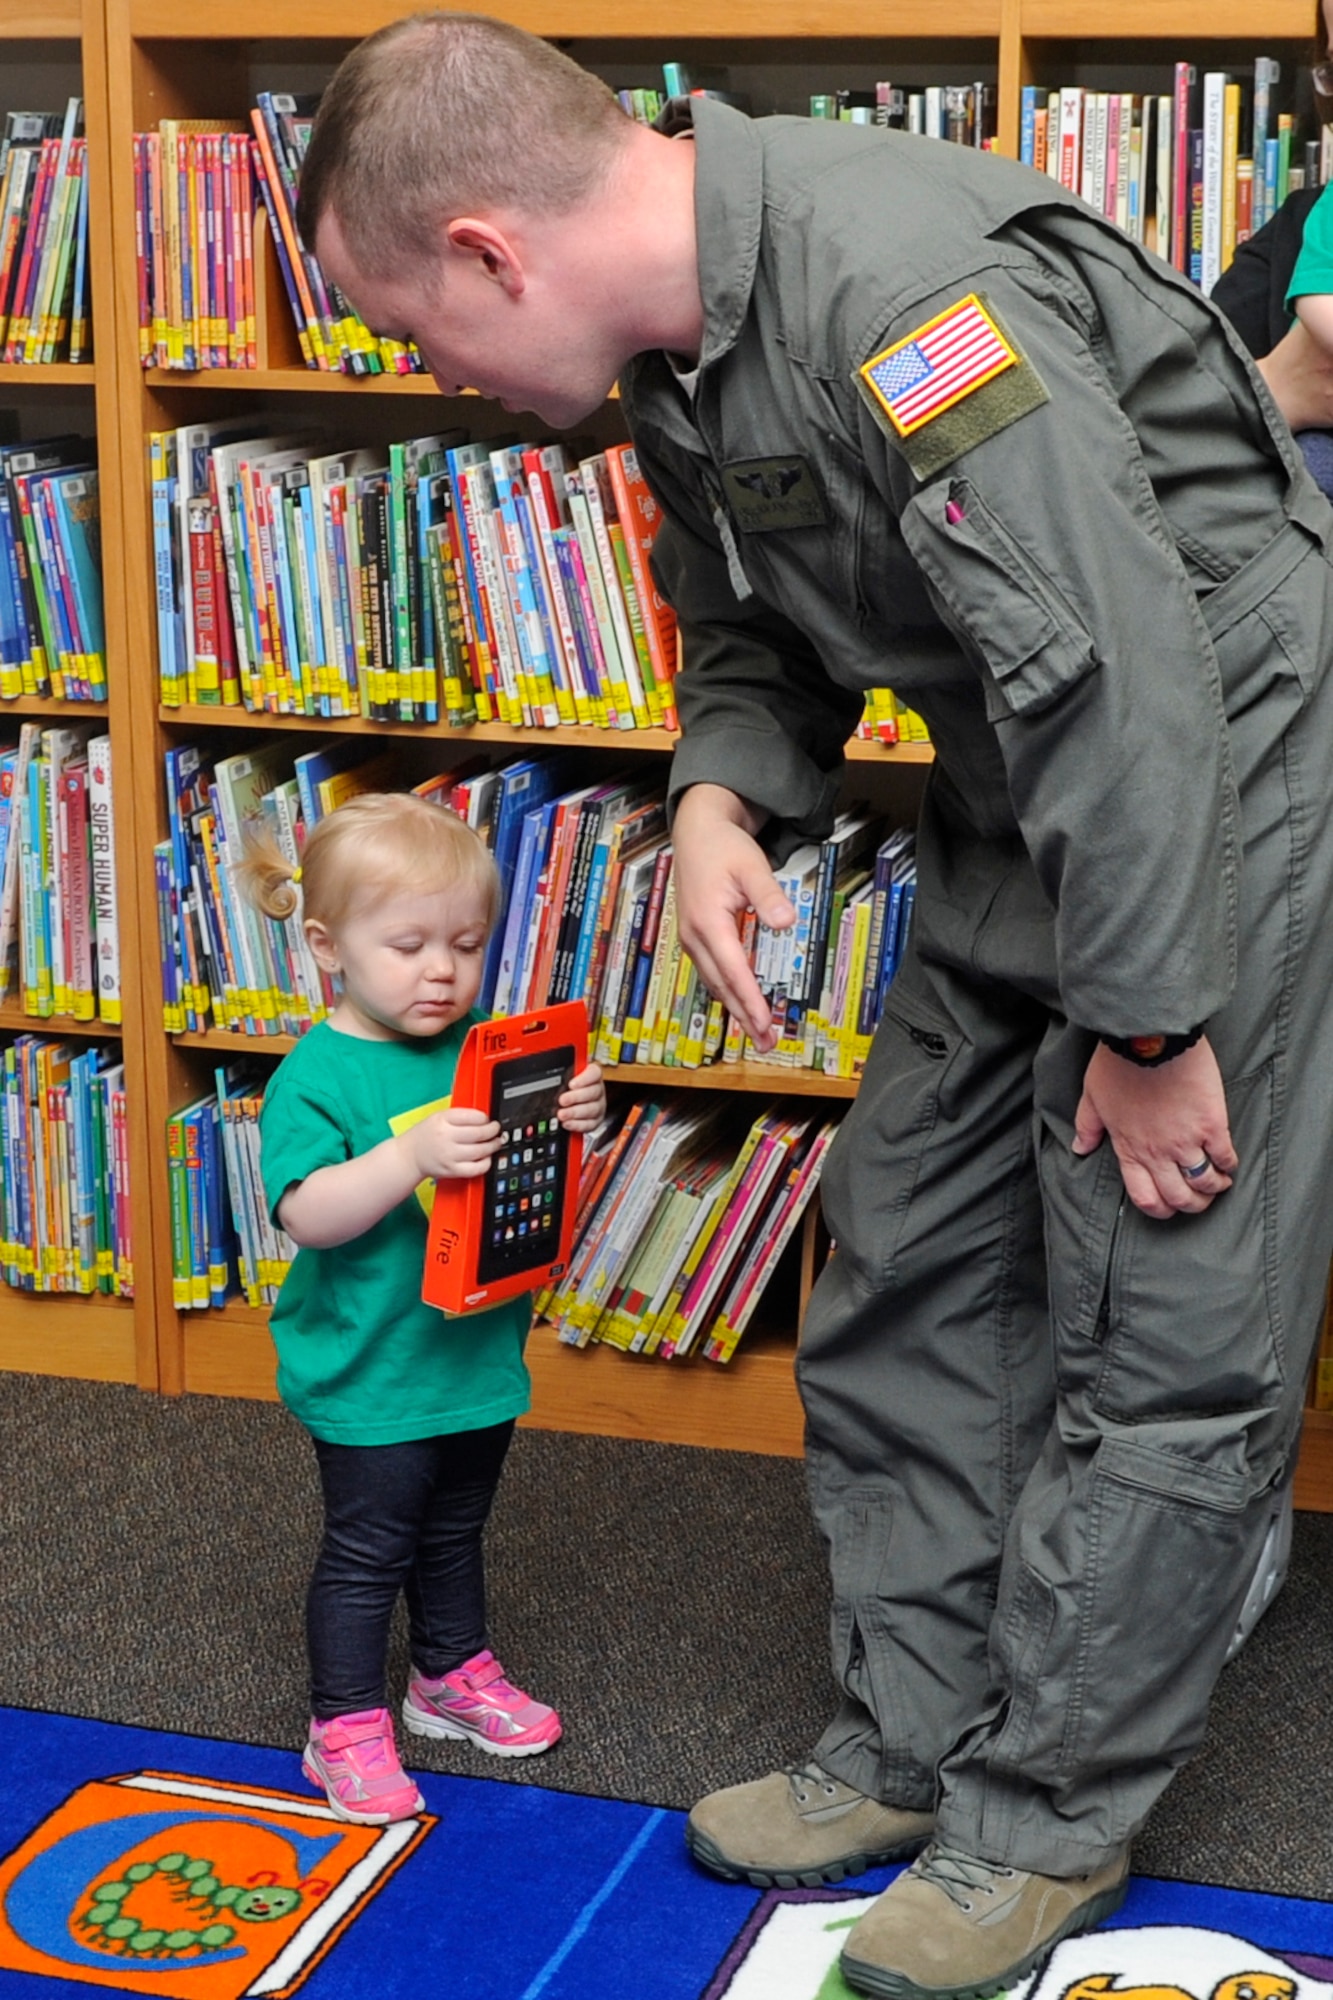 Cassidy Andersen, age two, looks at an electronic reader with her father, Senior Airman Glenn Andersen, a direct support operator with the 19th Special Operations Squadron, at Hurlburt Field, Fla., Oct. 17, 2016. Cassidy accumulated more than 1,100 minutes reading along with her parents as part of a two-month long summer reader program. (U.S. Air Force photo by Staff Sgt. Kentavist P. Brackin)